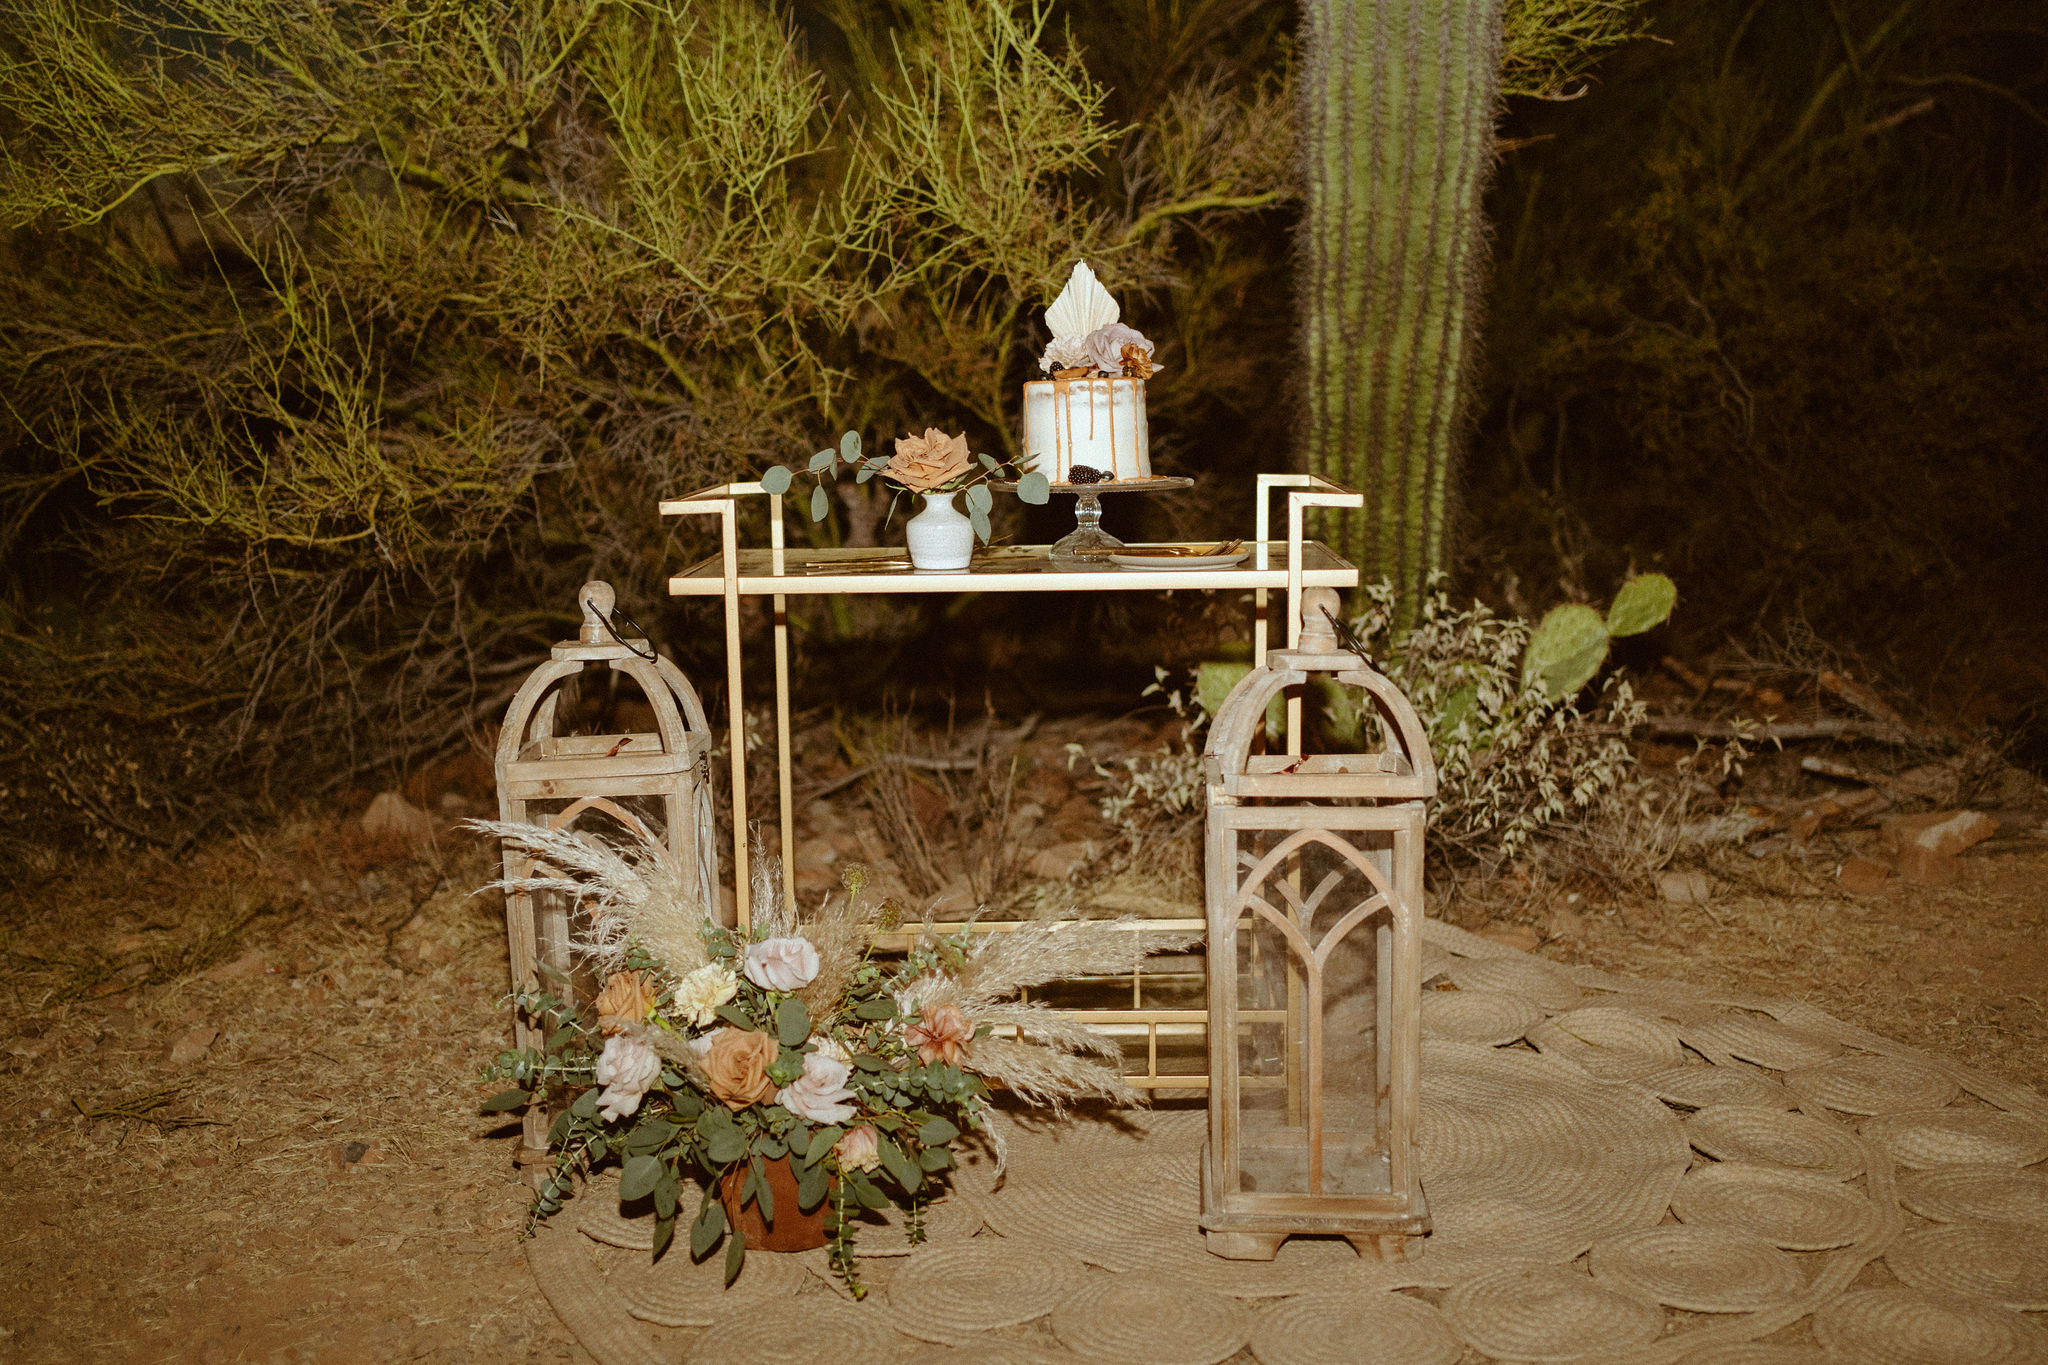 Bar cart cake table in front of the cactus with wooden lanterns and florals 